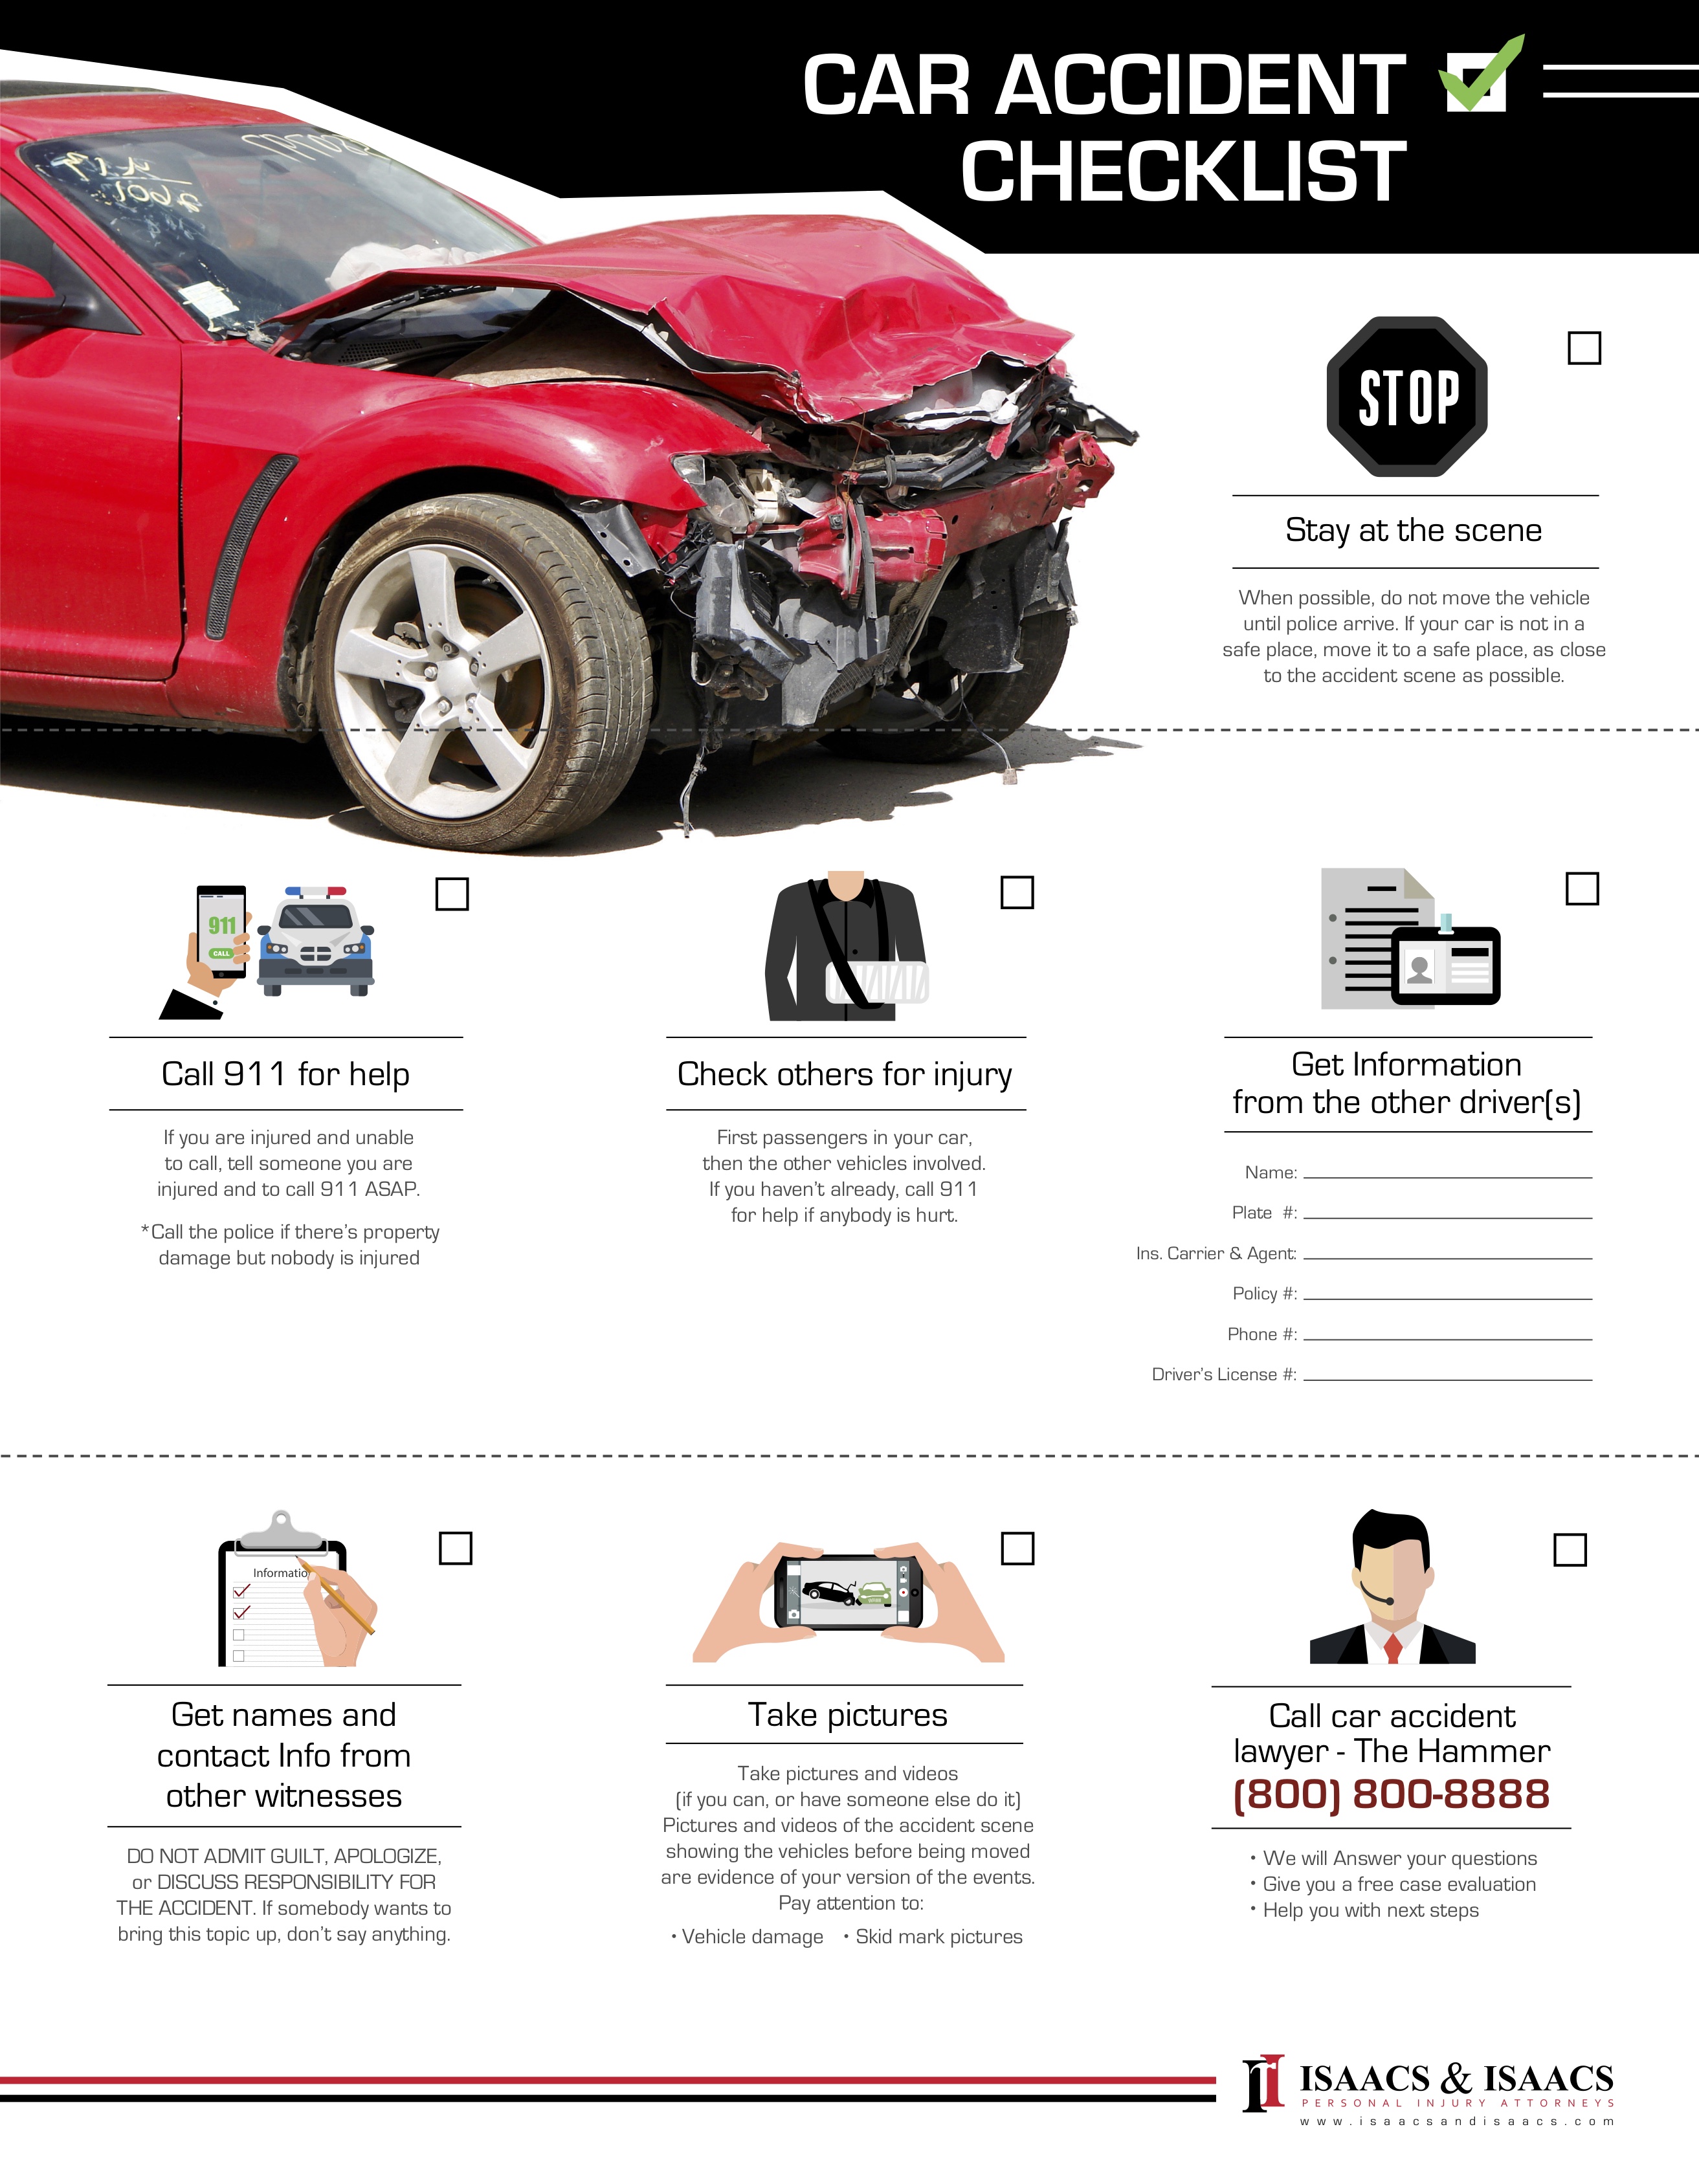 Car Accident Checklist – Download, Print, Put in Your Vehicle